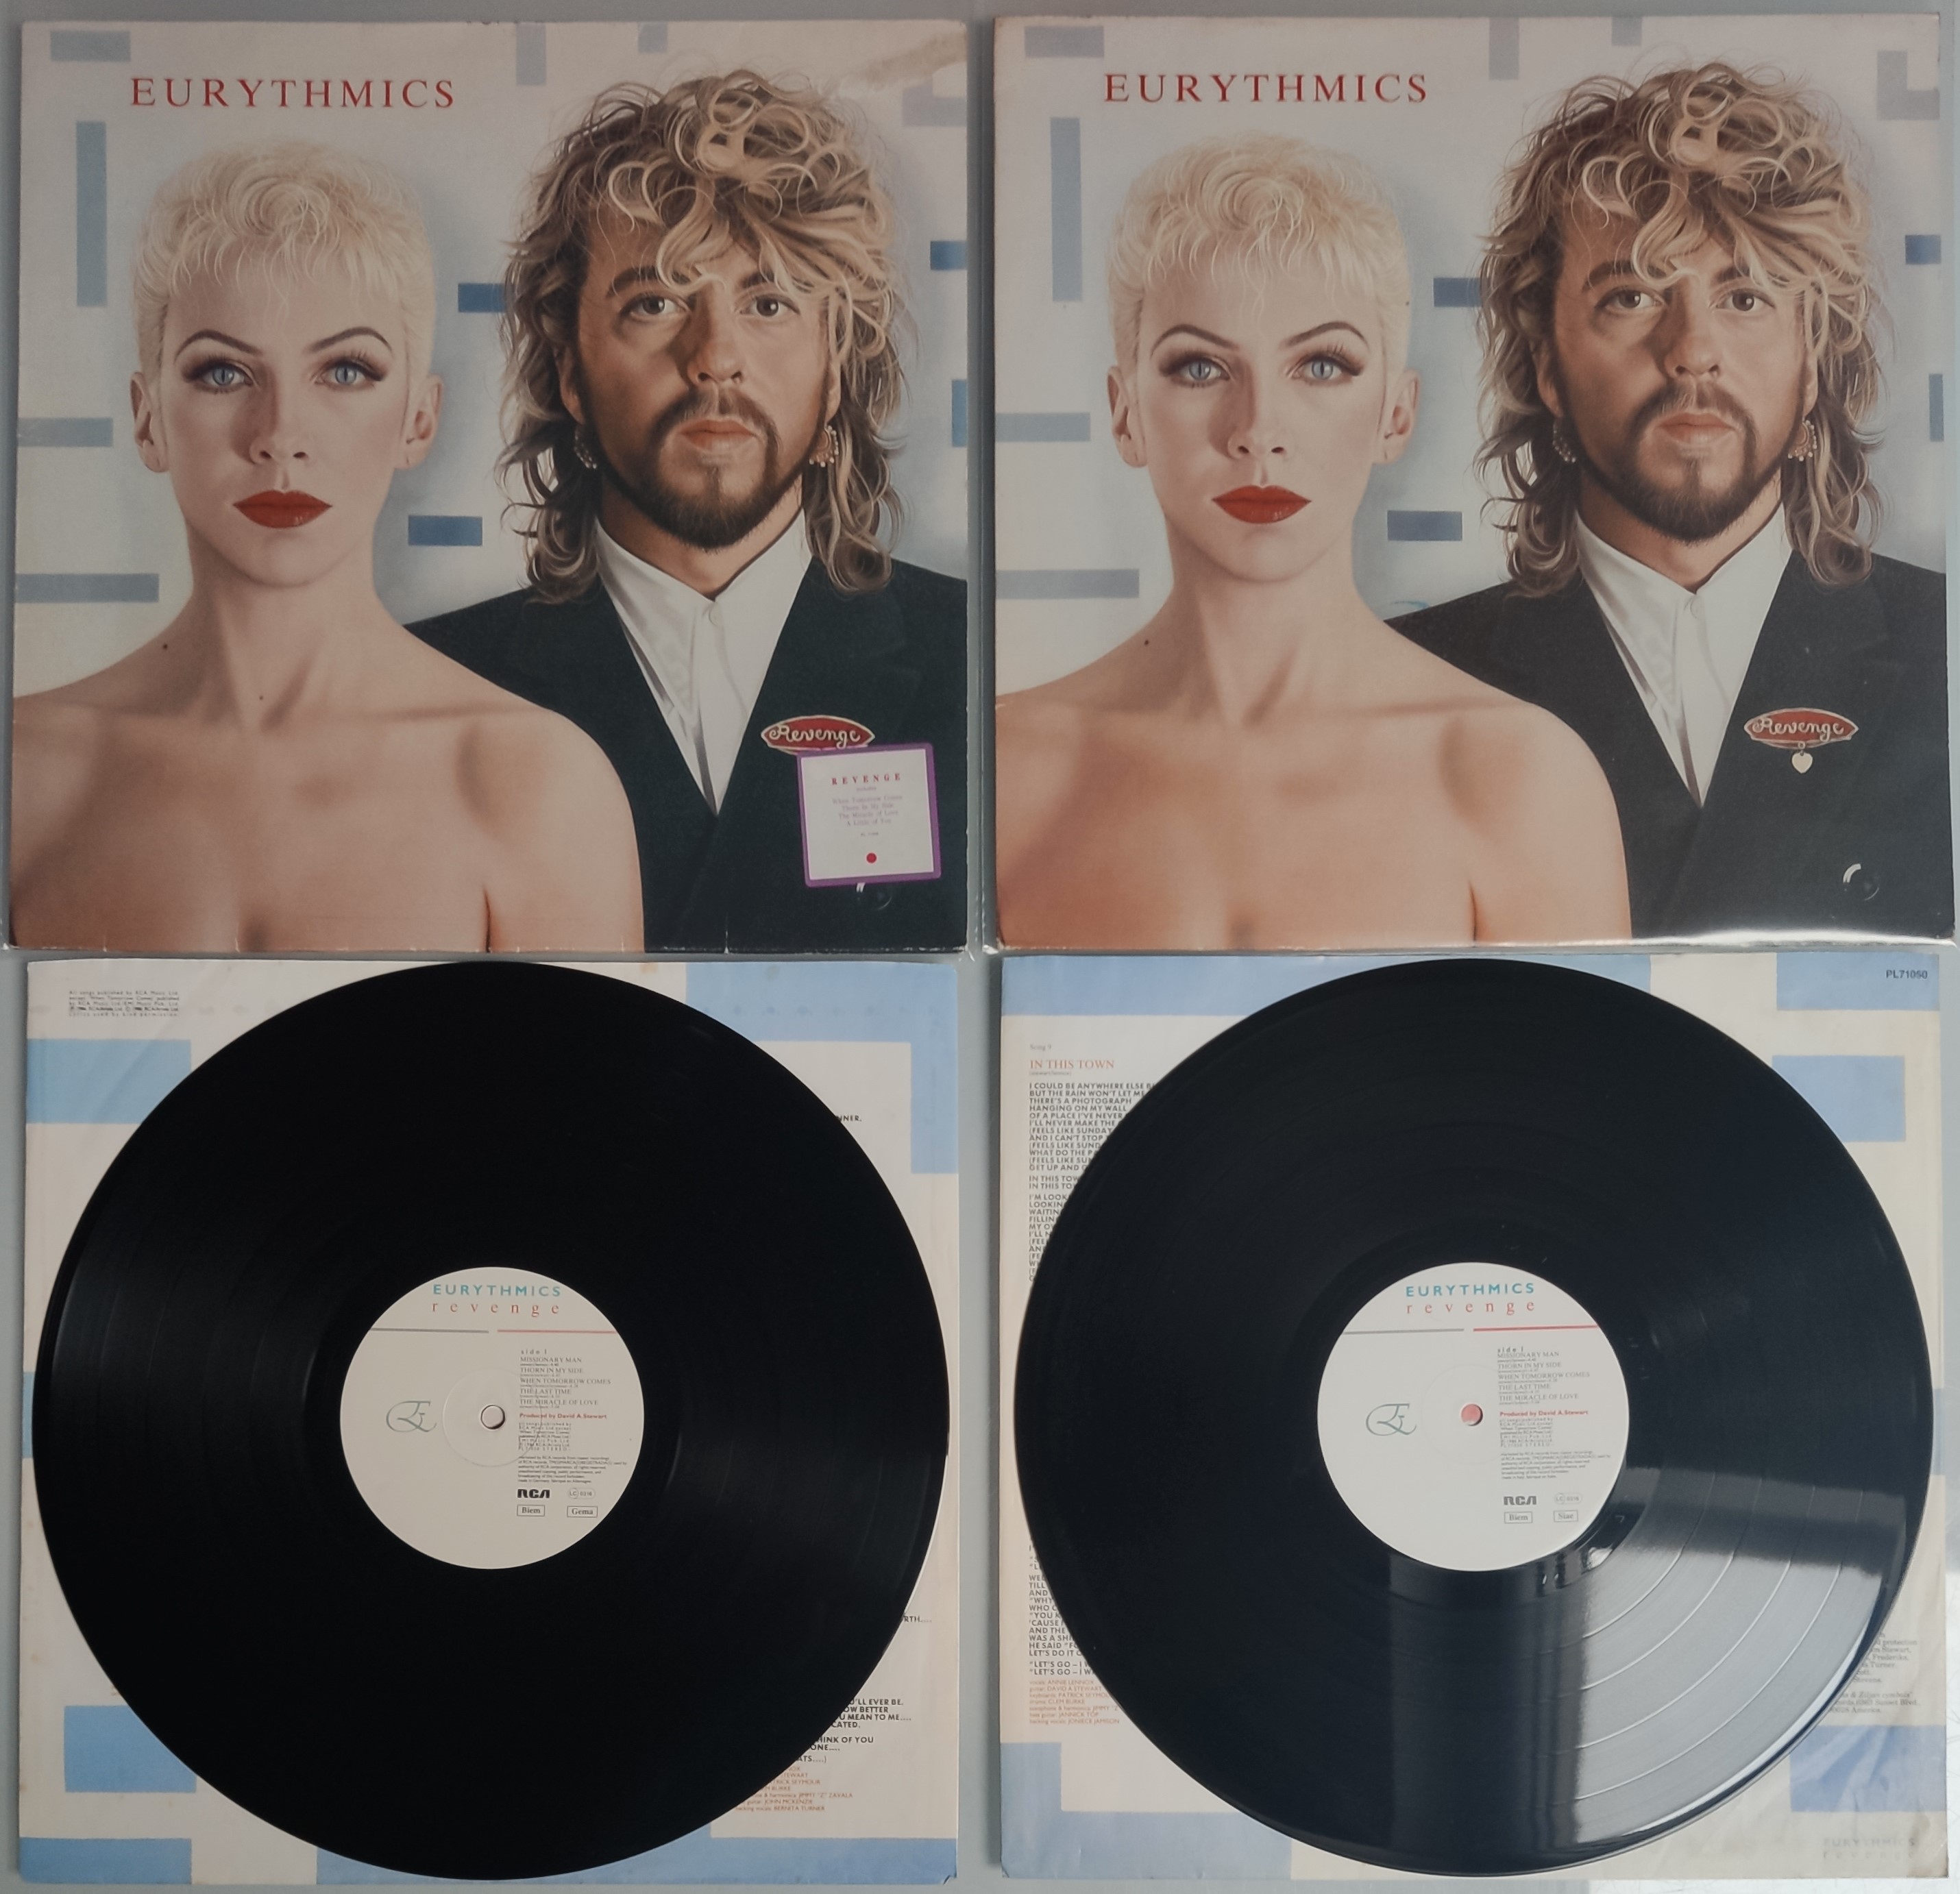 A Collection of 12 x Eurythmics / Annie Lennox New Wave Vinyl LPs and 12” Single. - Image 5 of 9